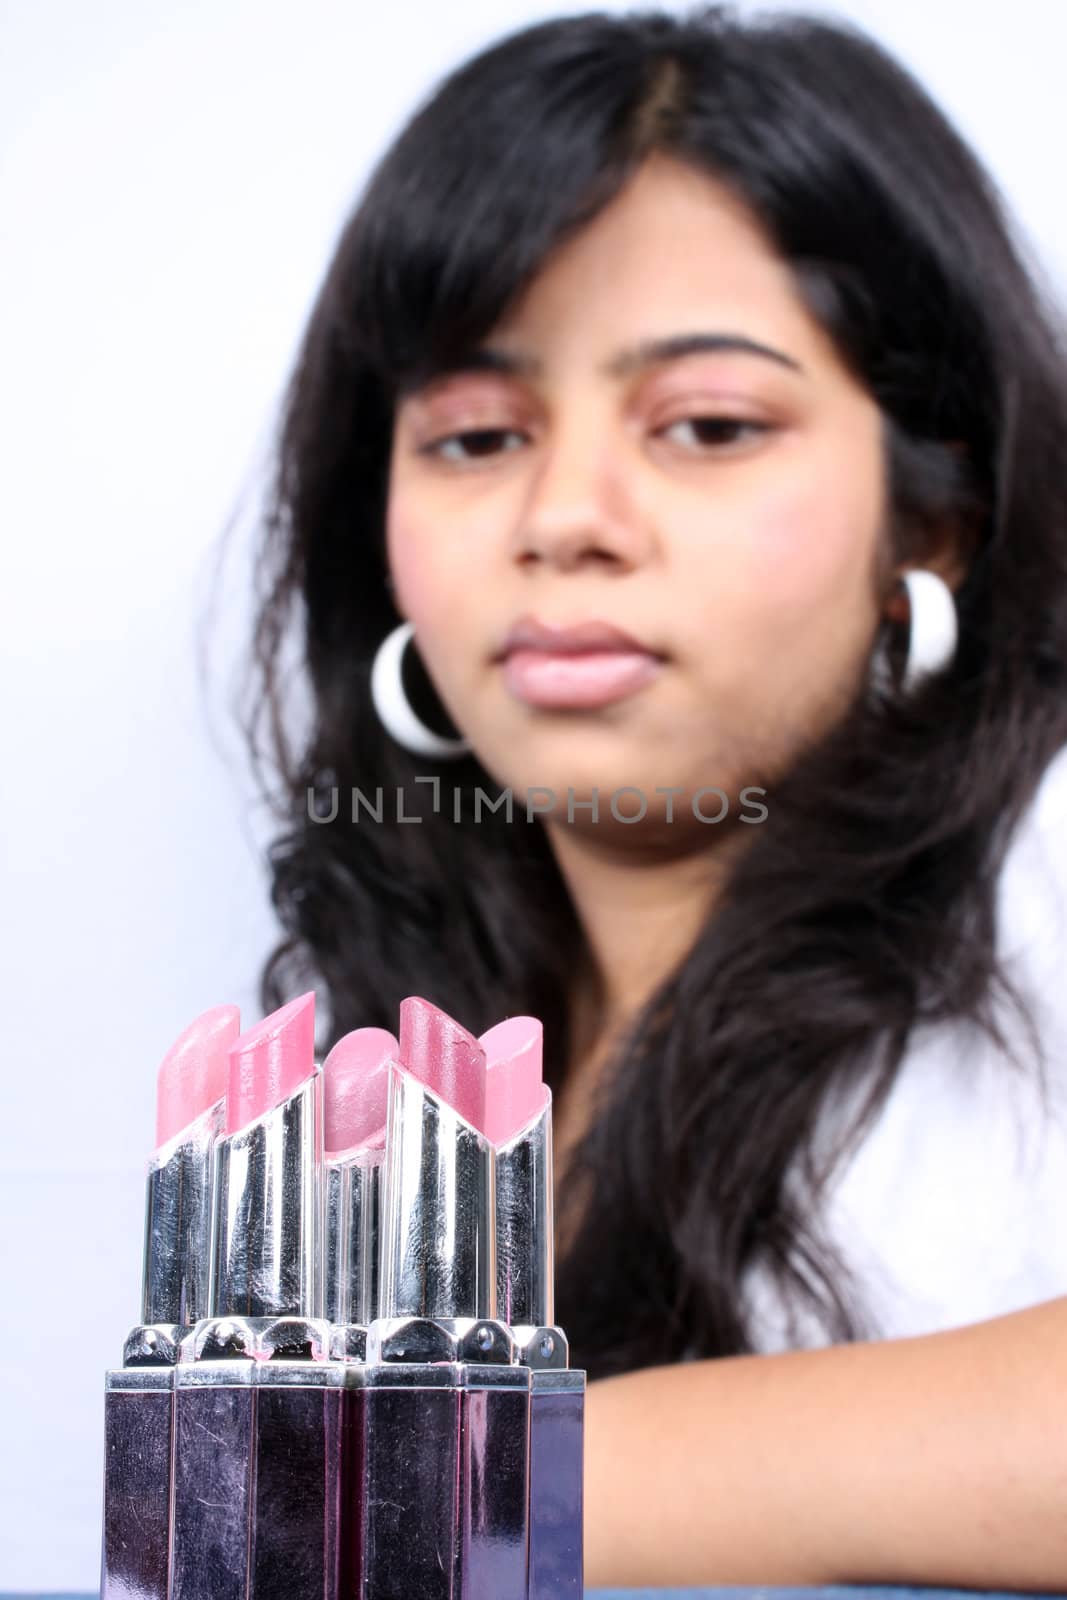 A metaphorical cosmetic background with a view of variety of lipsticks for choice in front of a teenager.